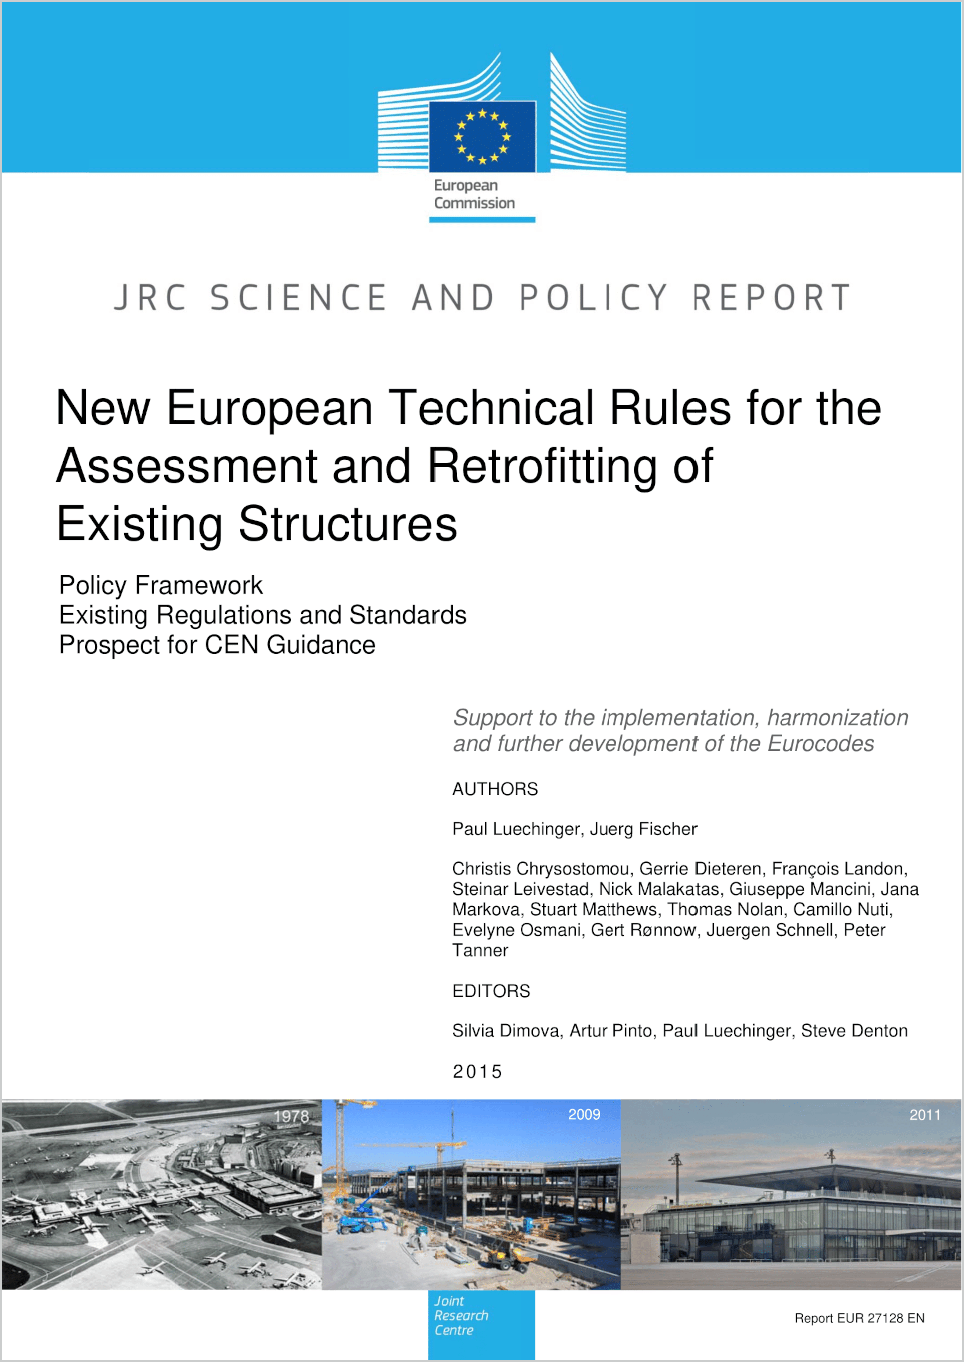 New European Technical Rules for the Assessment and Retrofitting of Existing Structures